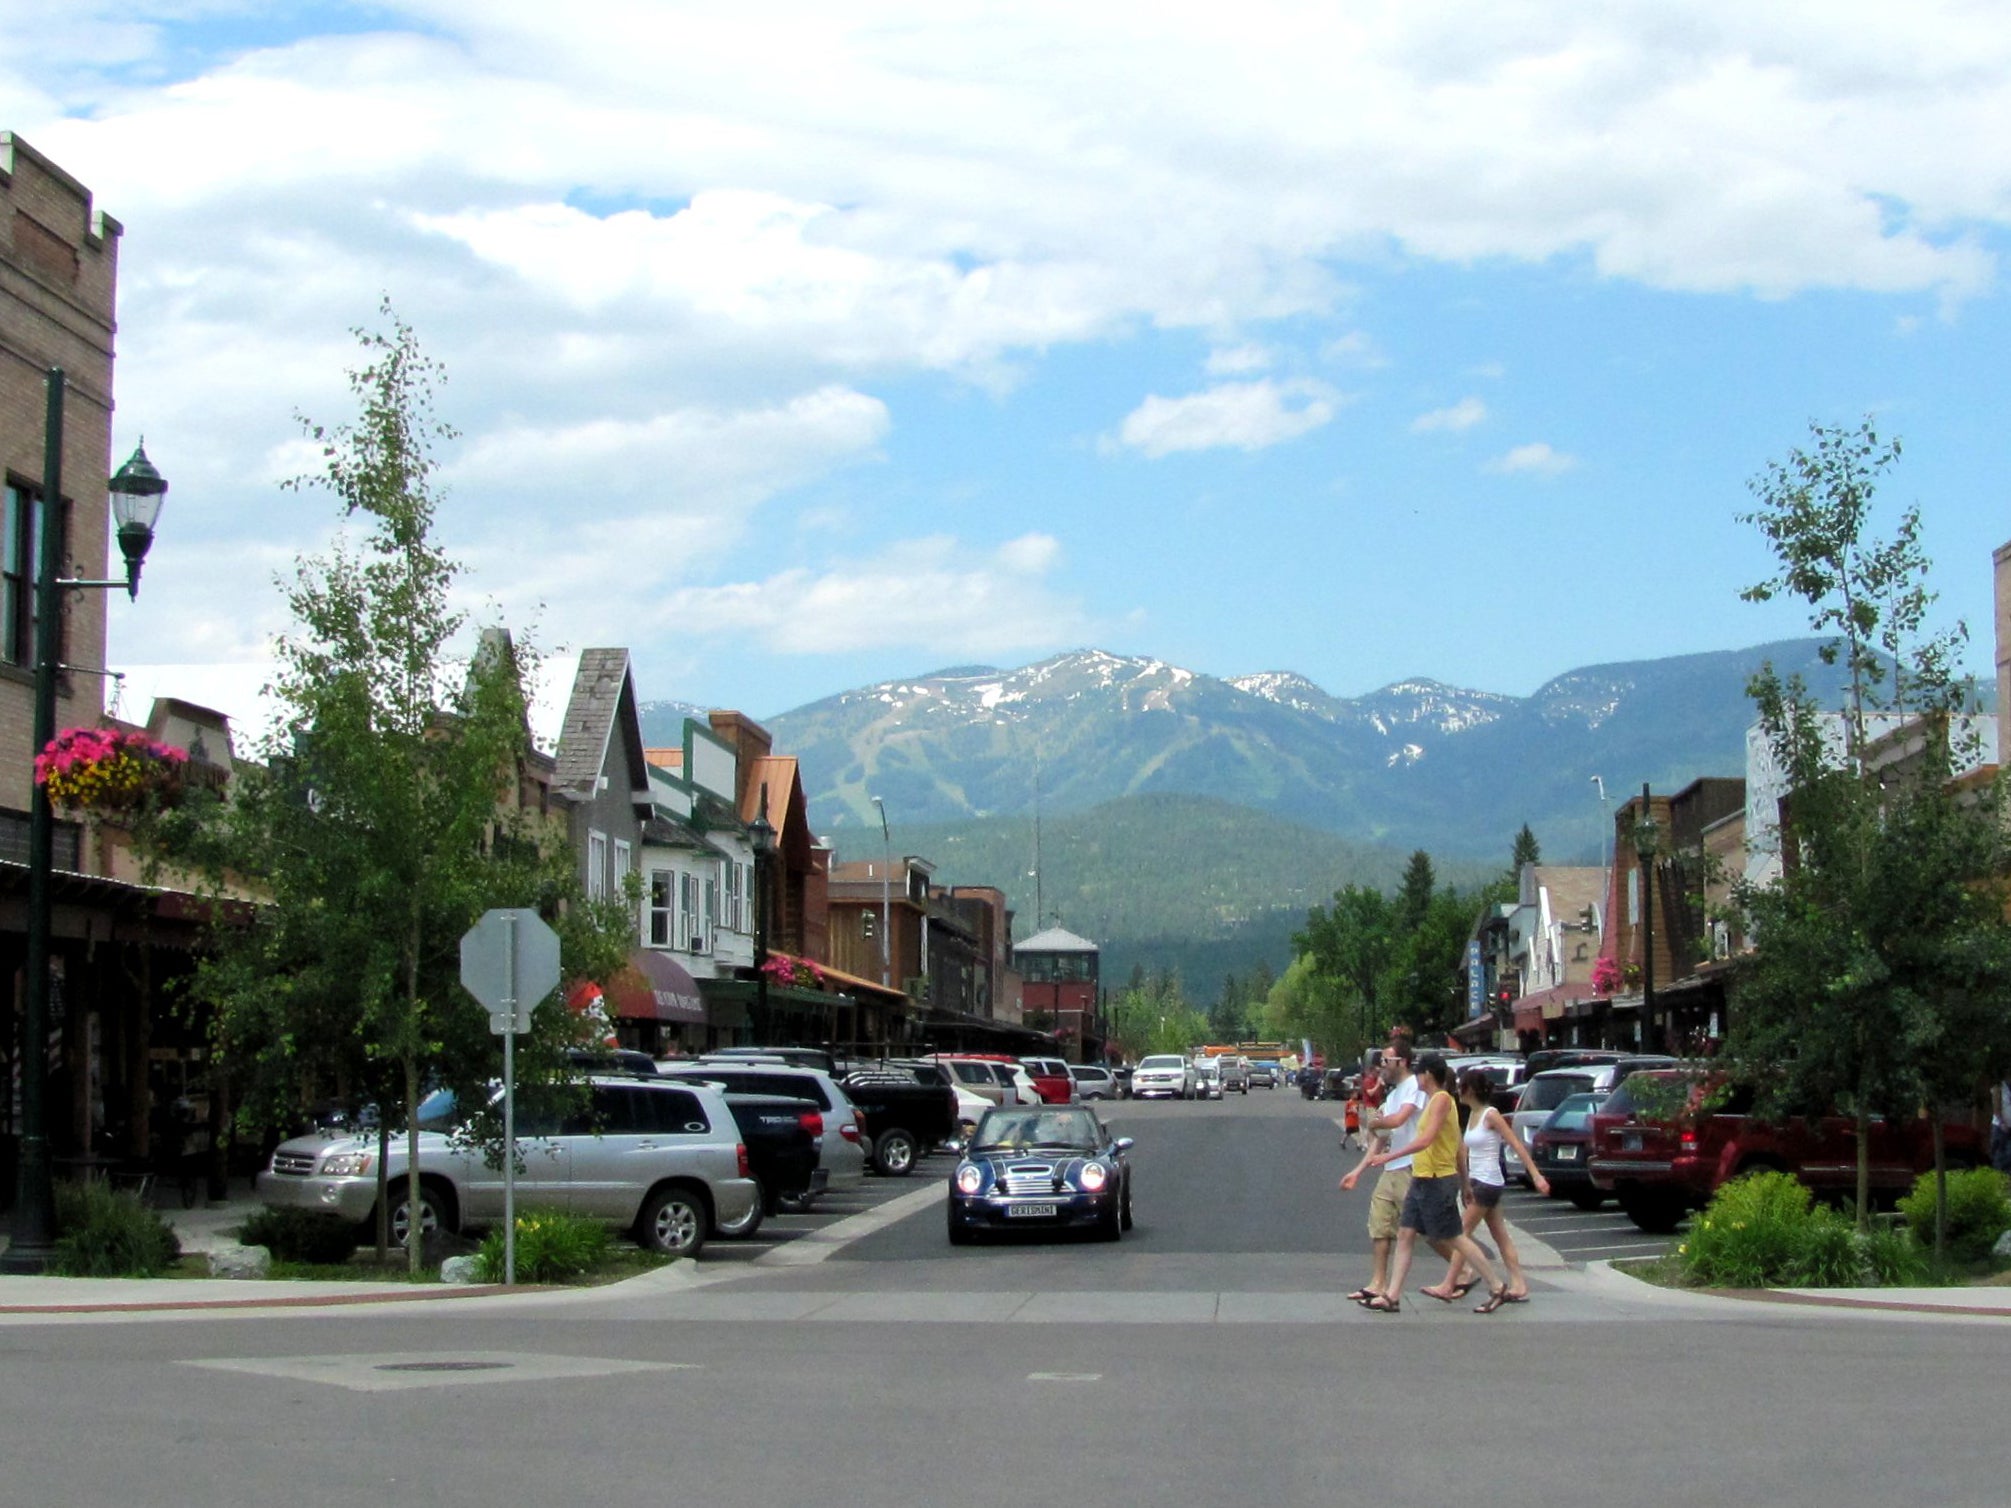 Downtown Whitefish, the hometown of prominent white supremacist, Richard Spencer